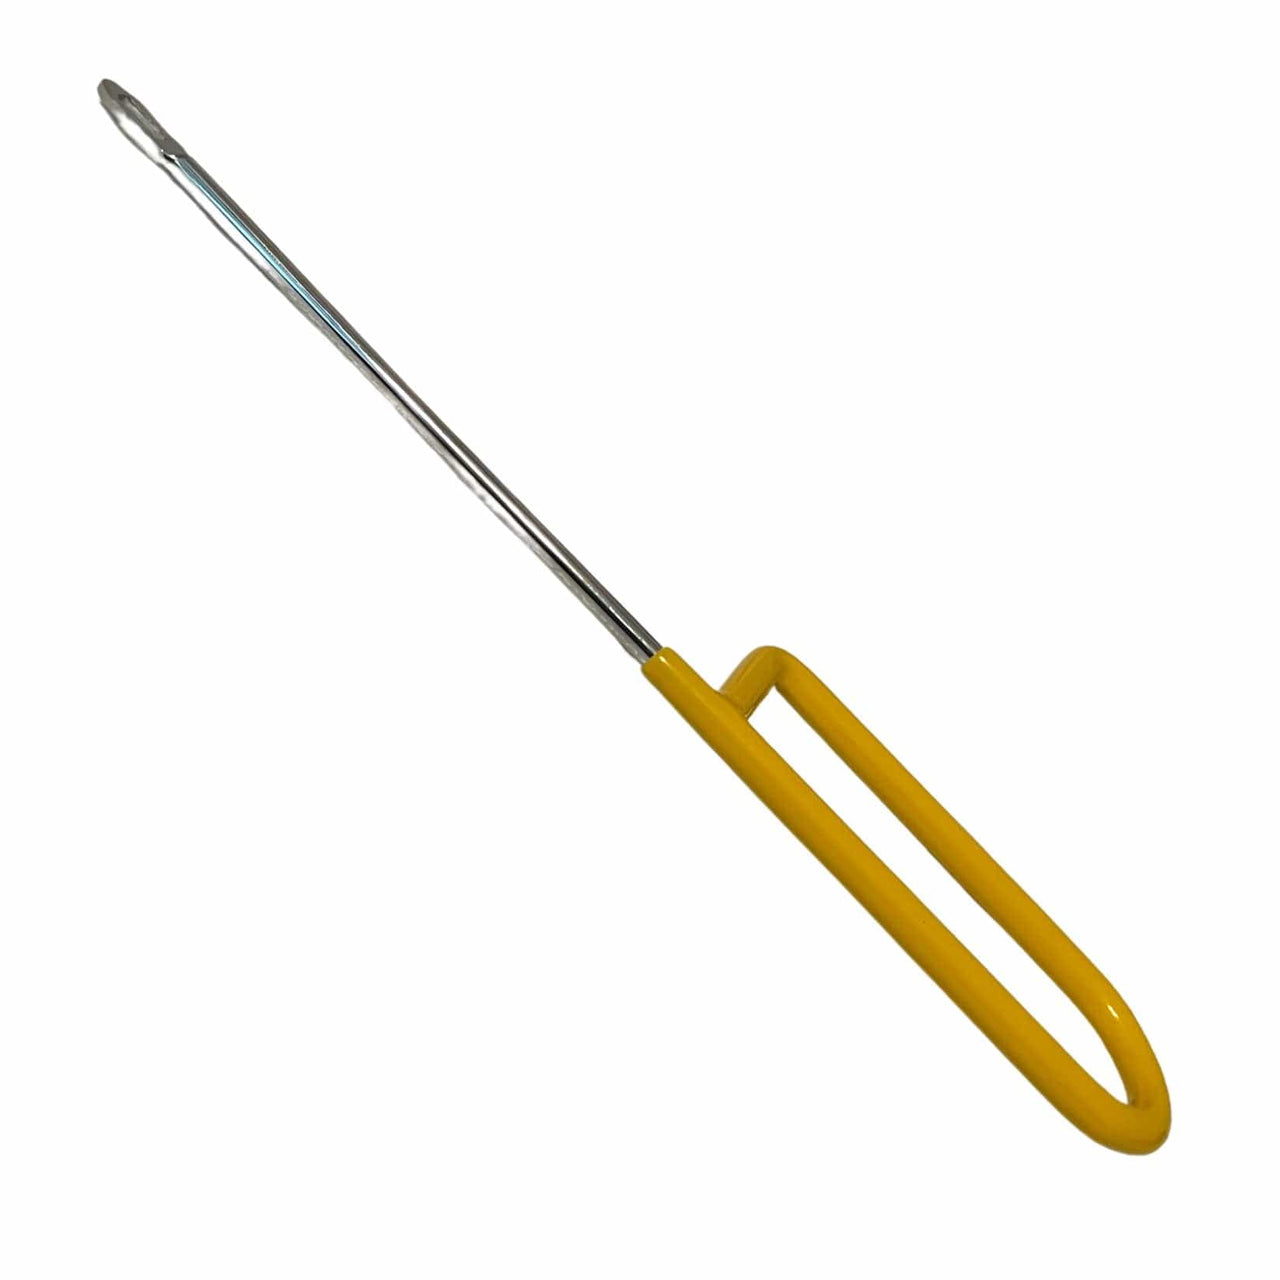 Covey Sports Sporting Goods Covey Sports Baseball & Softball Glove Lacing Needle (Awl-Style Tool)